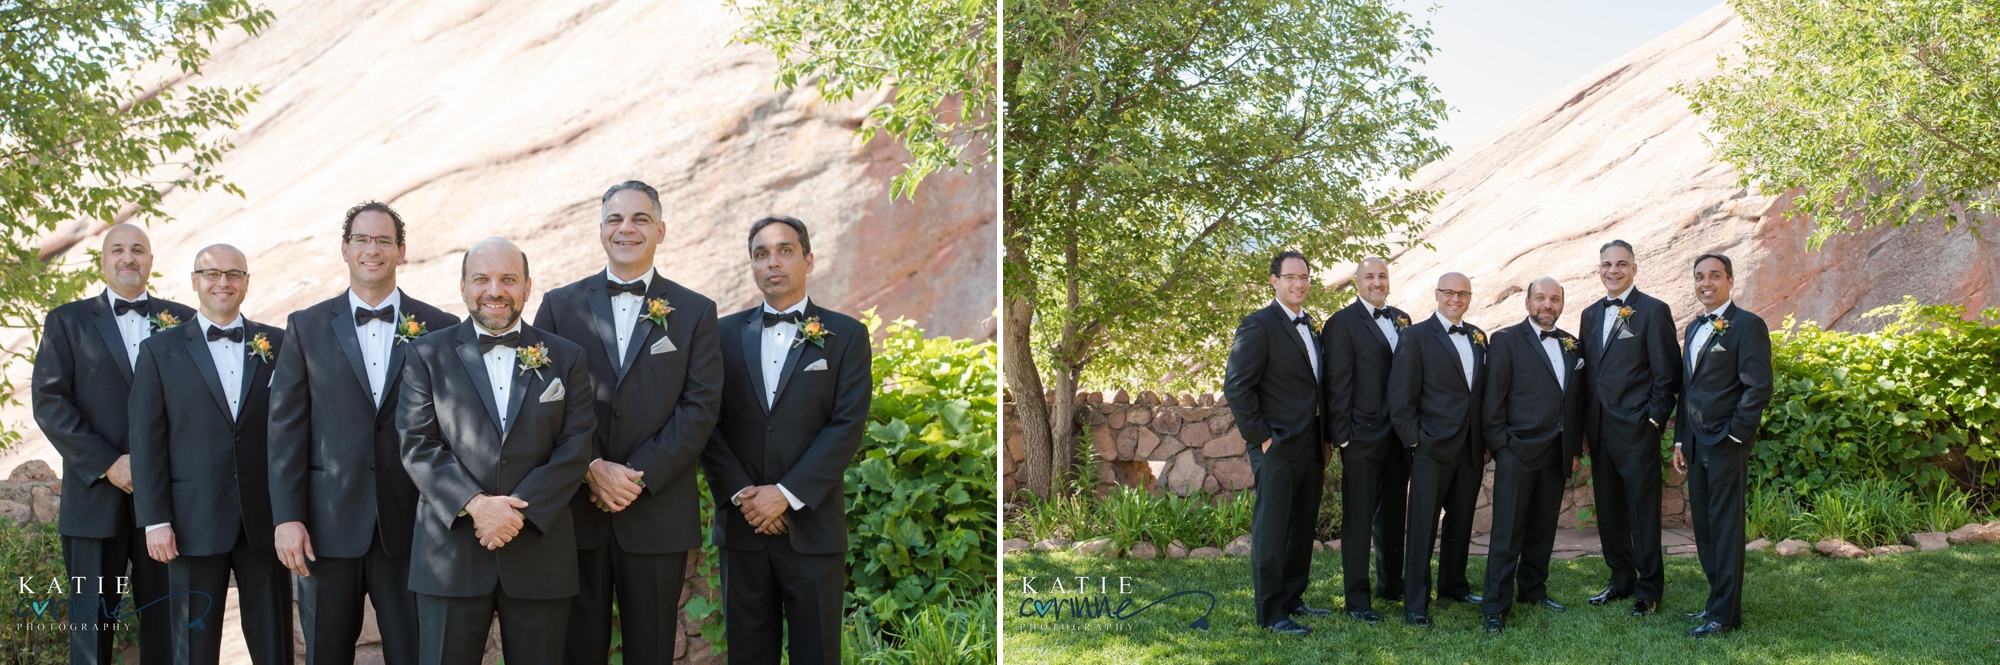 Groom and groomsman at red rocks amphitheater